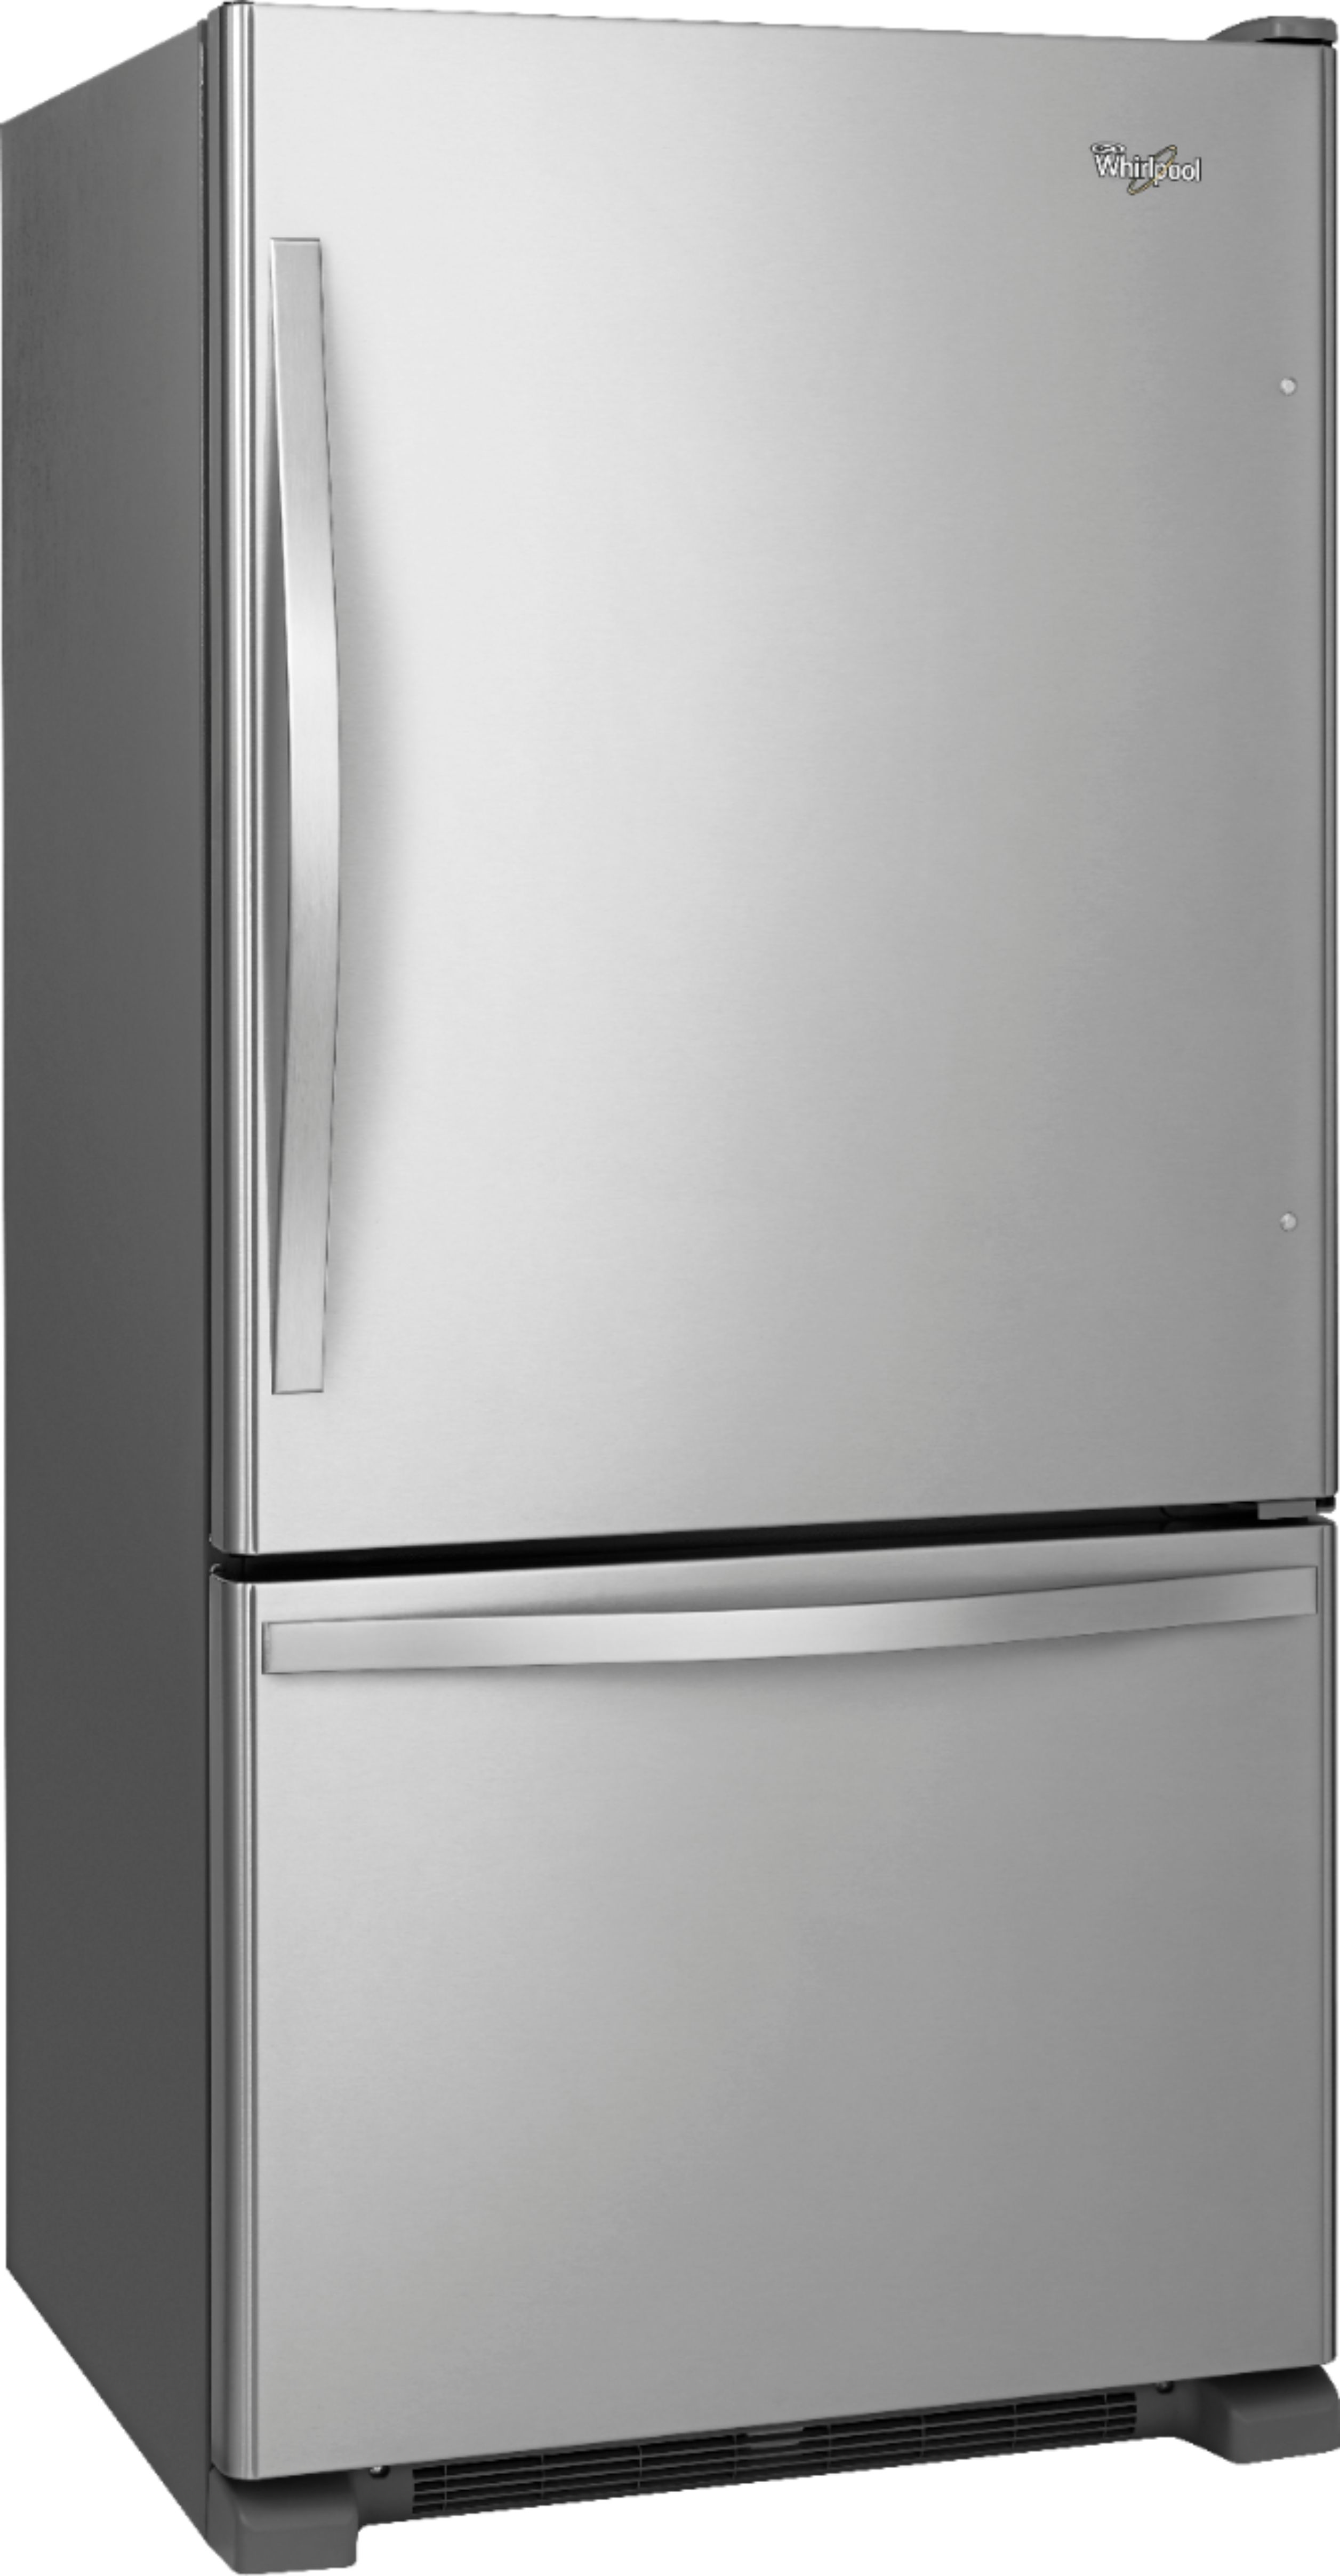 Angle View: Whirlpool - 18.7 Cu. Ft. Bottom-Freezer Refrigerator with Spillguard Glass Shelves - Monochromatic Stainless Steel